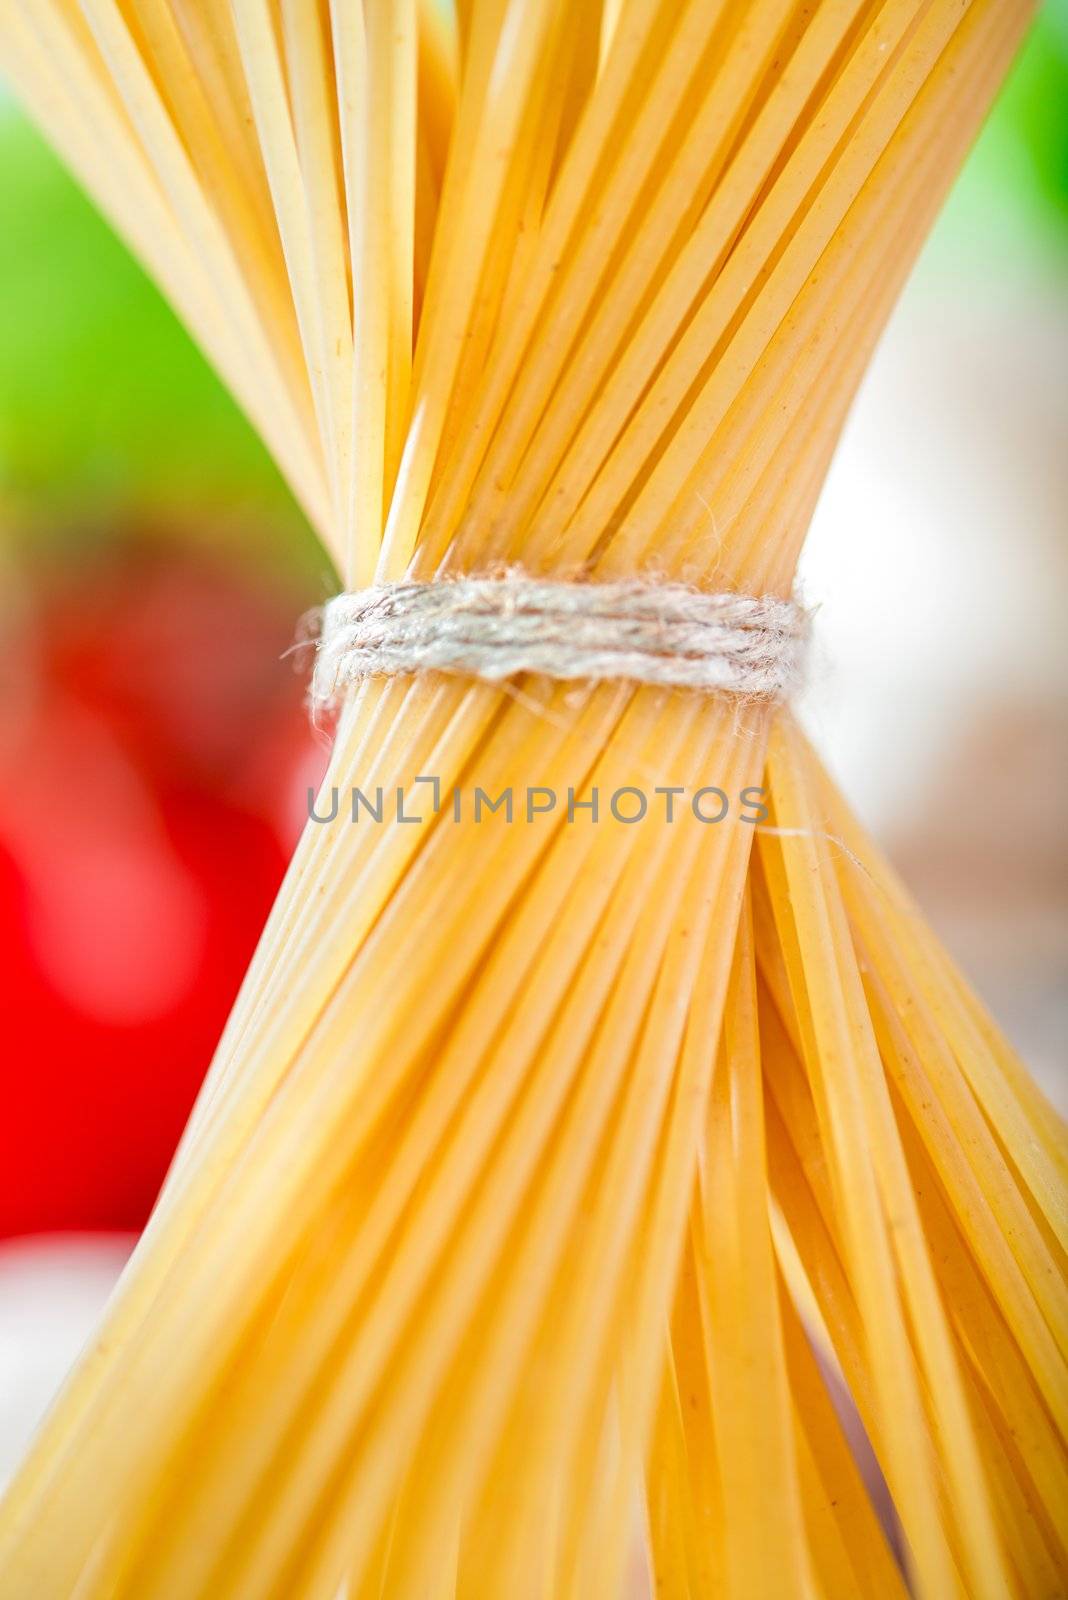 uncooked spaghetti tied with rope